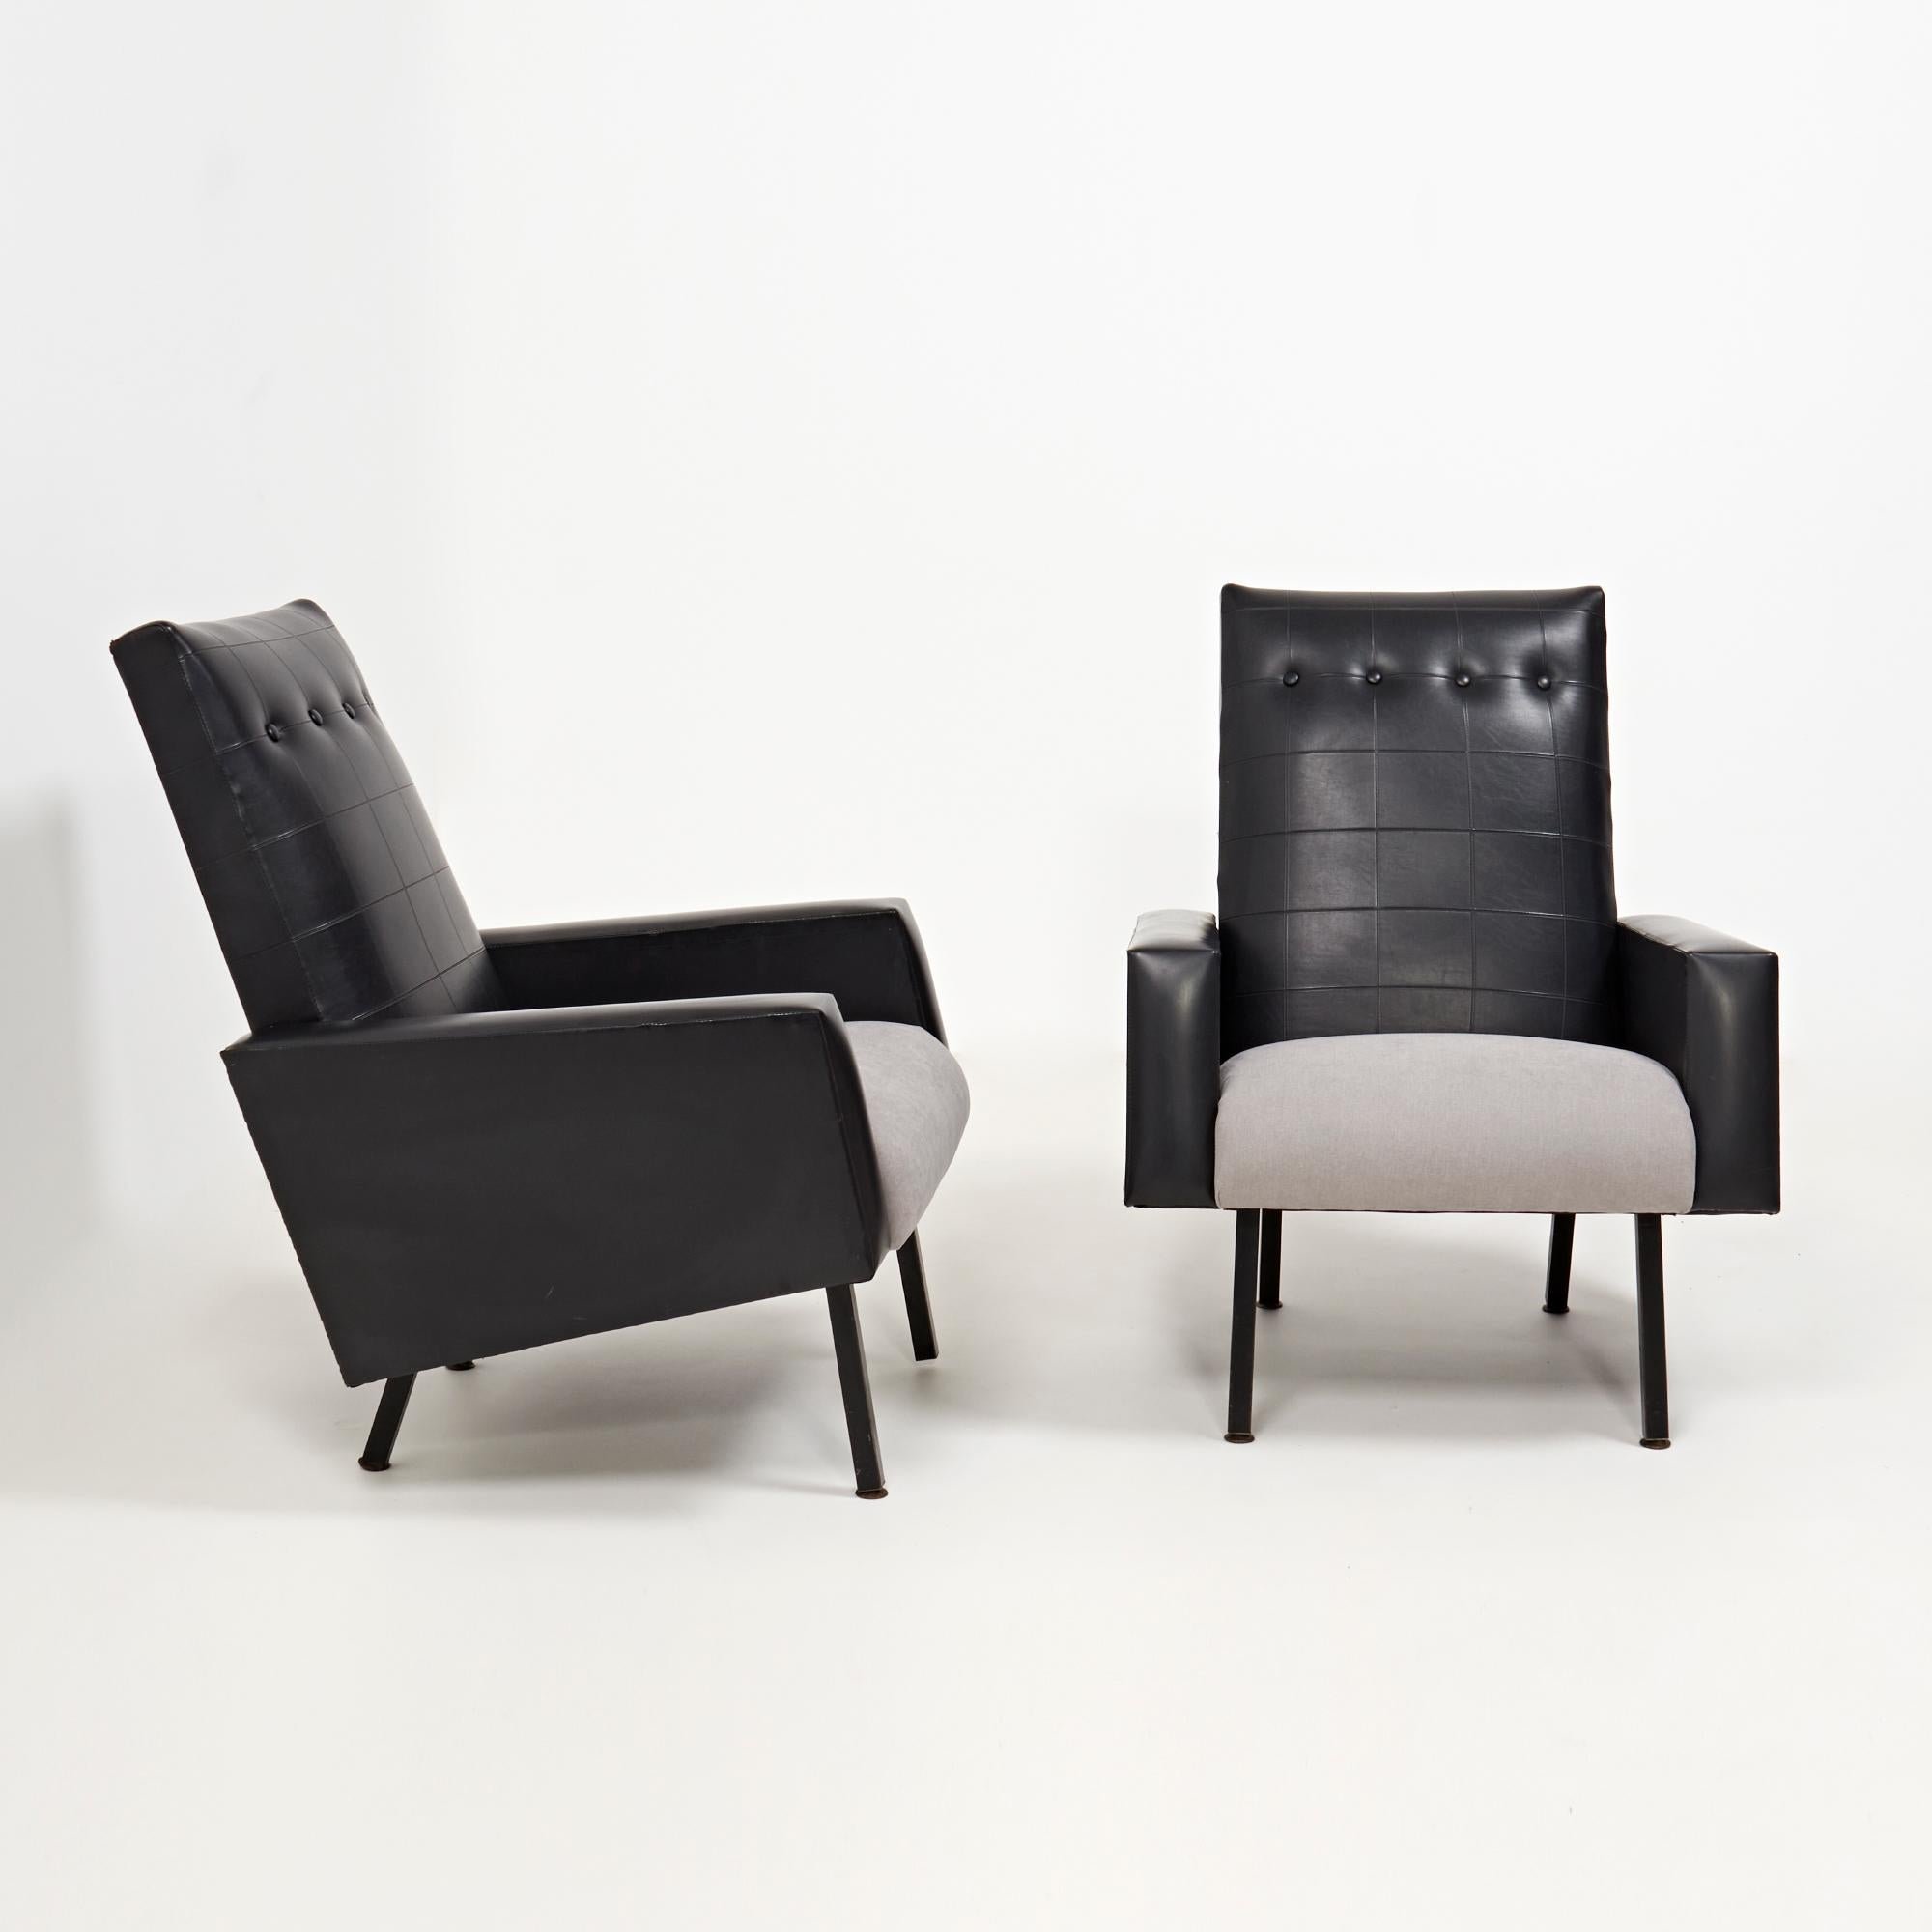 Designed in the style of Pierre Guauriche, this set of armchairs have a Classic Mid Century aesthetic.

Featuring a striking silhouette, the chairs sit on black metal legs and are upholstered in black vinyl leather with a contrasting grey fabric